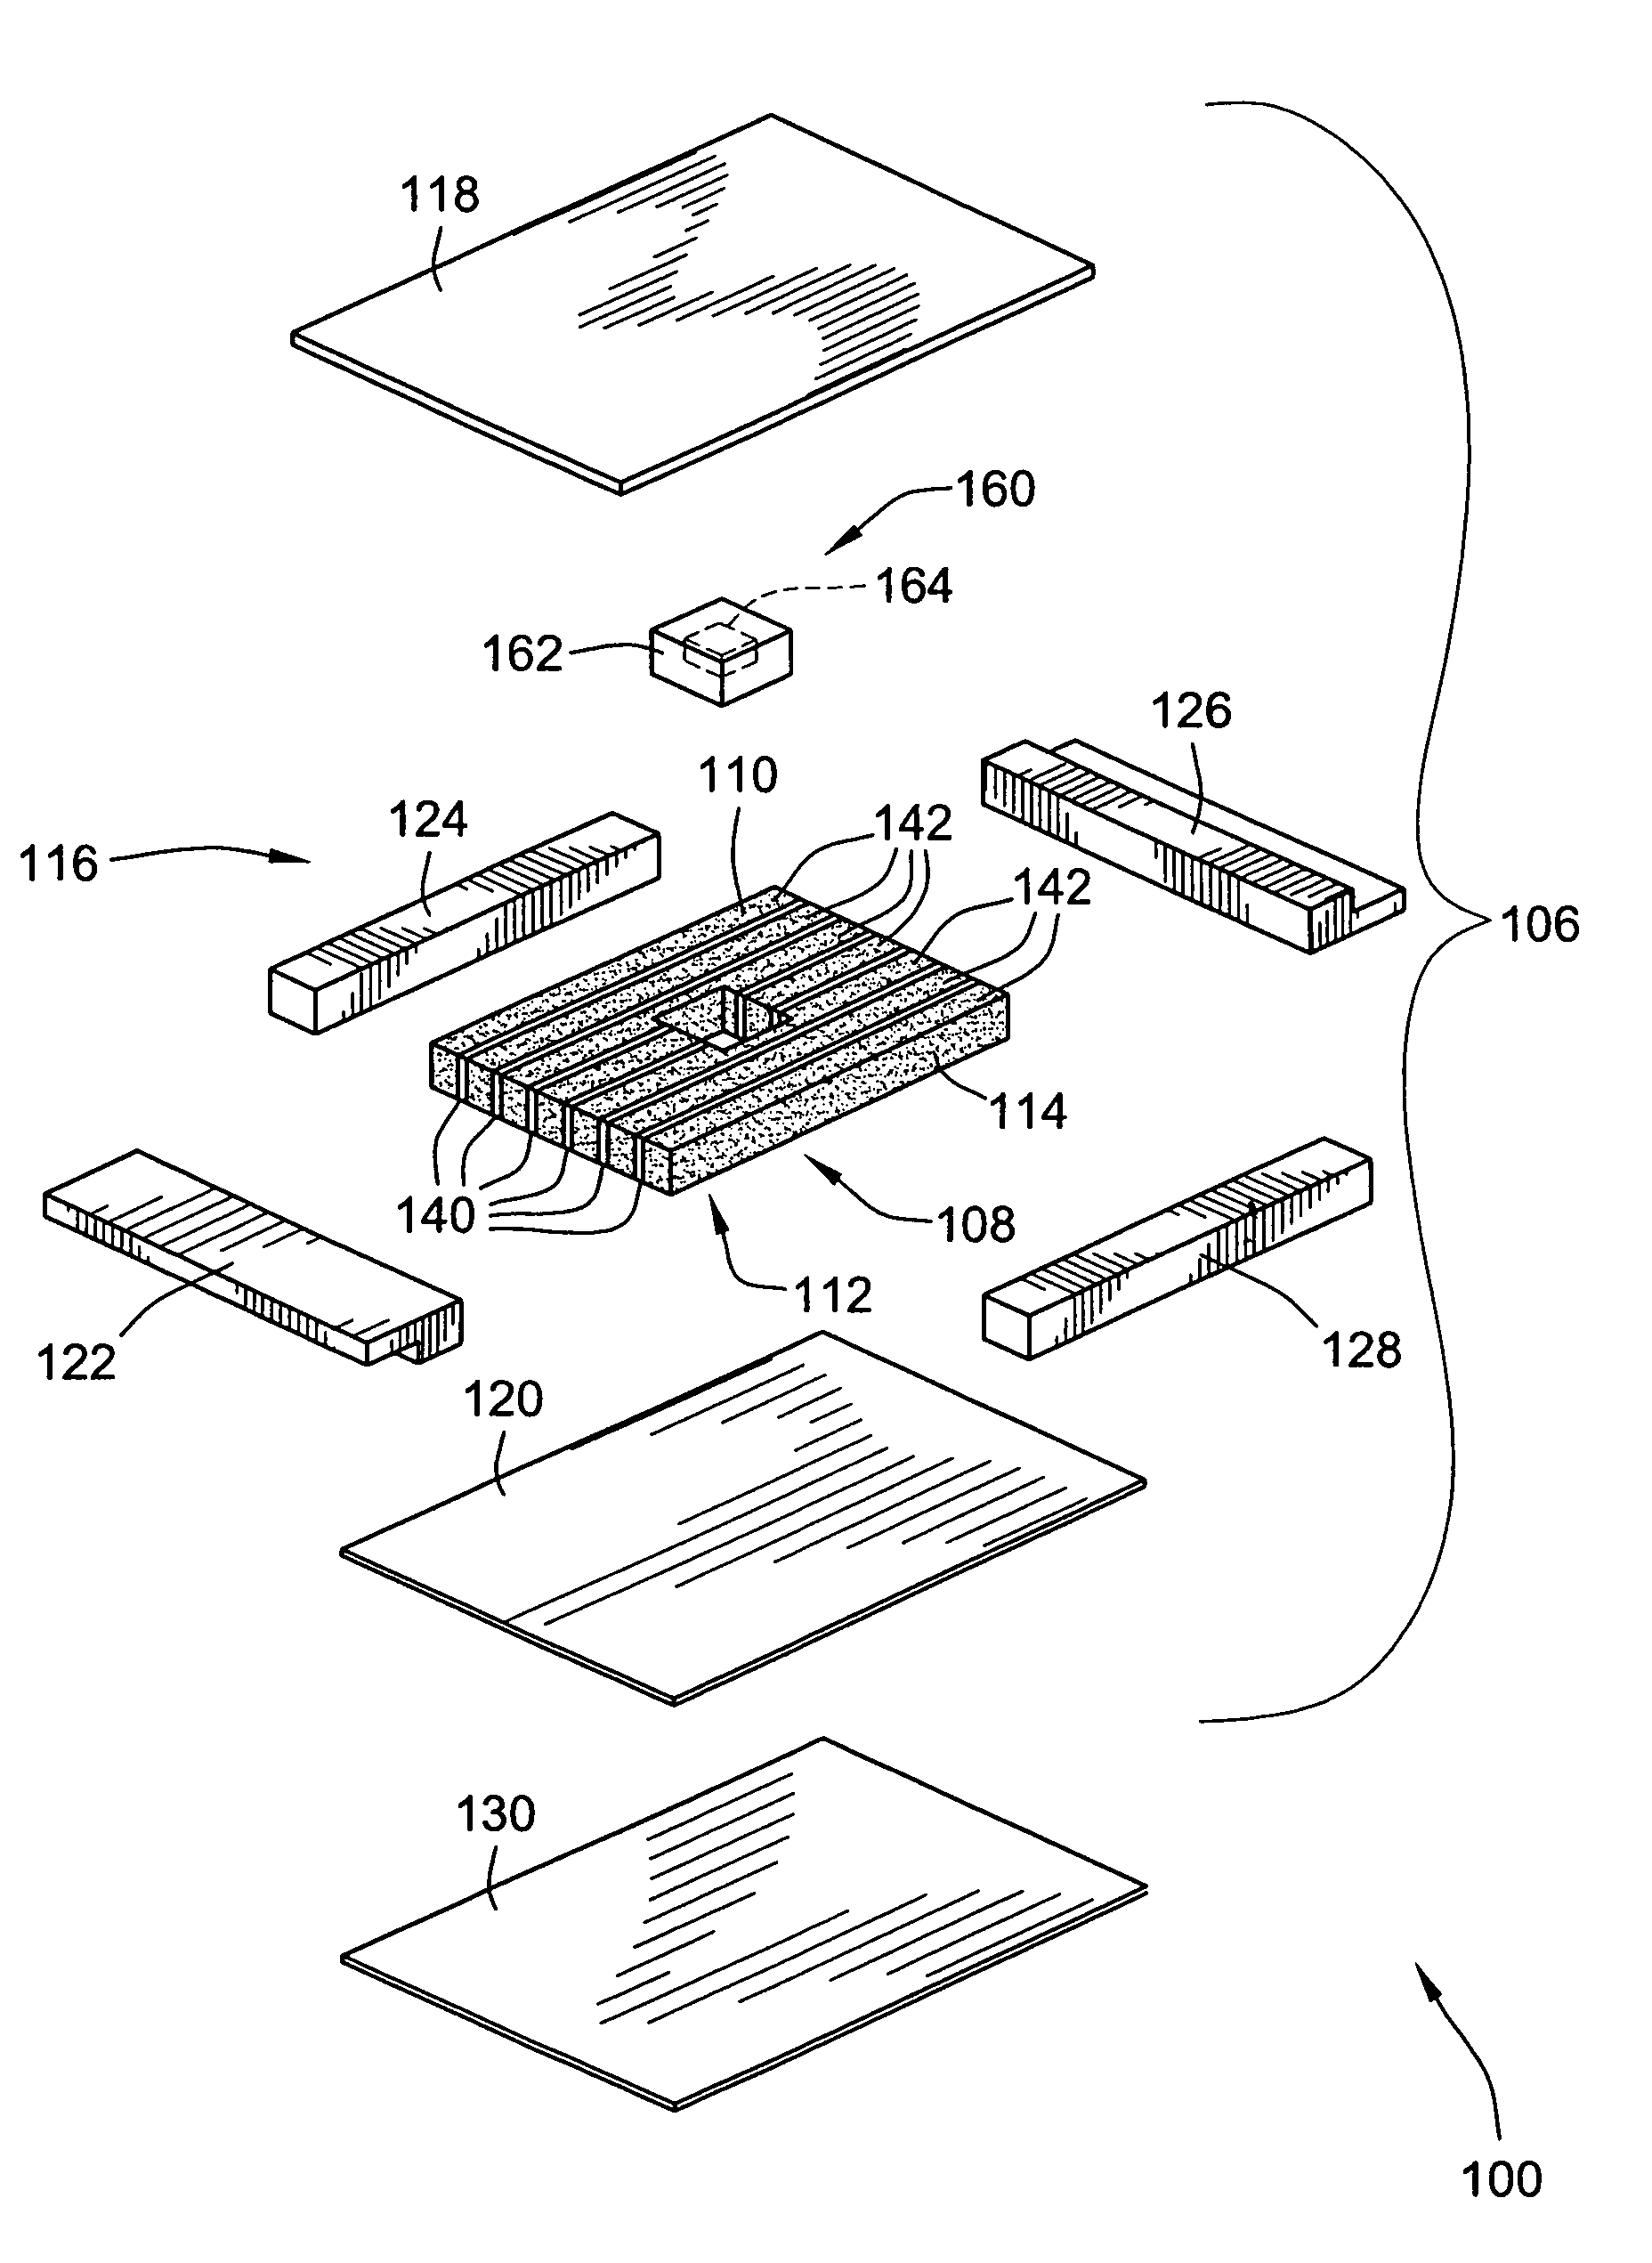 Fire retardant panel apparatus and method of making and using same